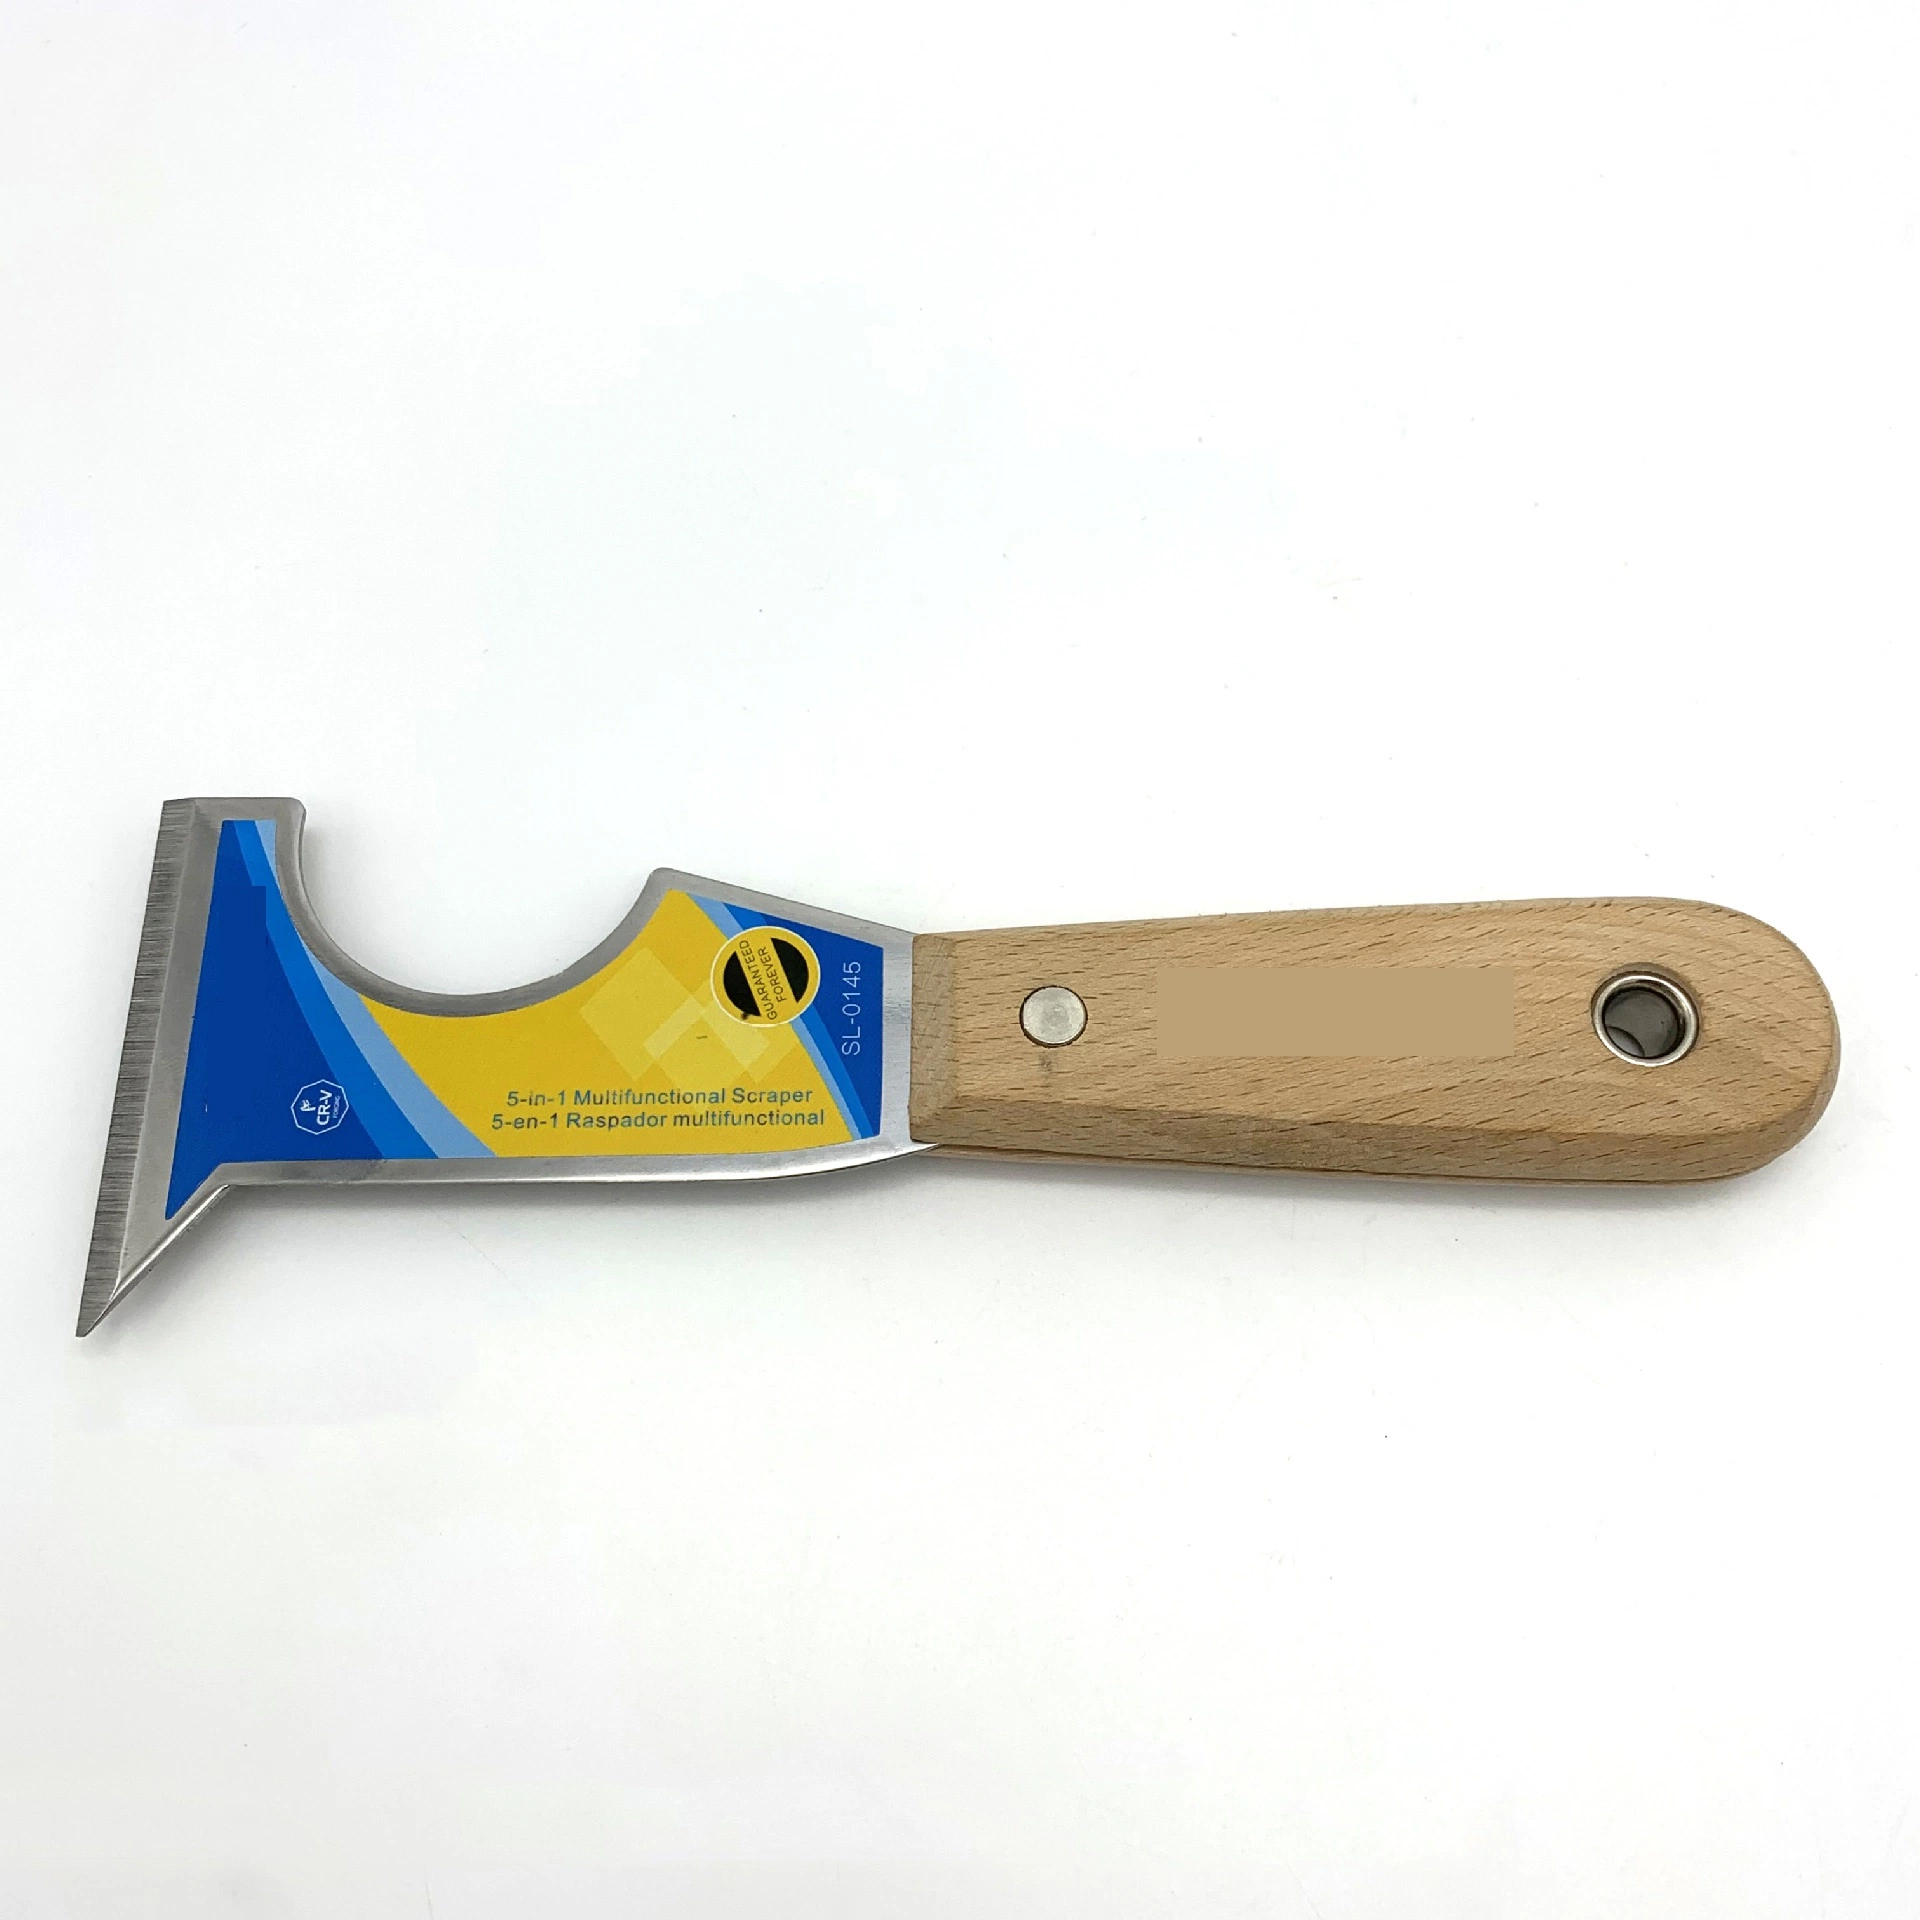 Knife Shovel Mirror Polished Scraper Putty Scraper Large White Tool Multi-Functional Shovel Wooden Handle Putty Knife